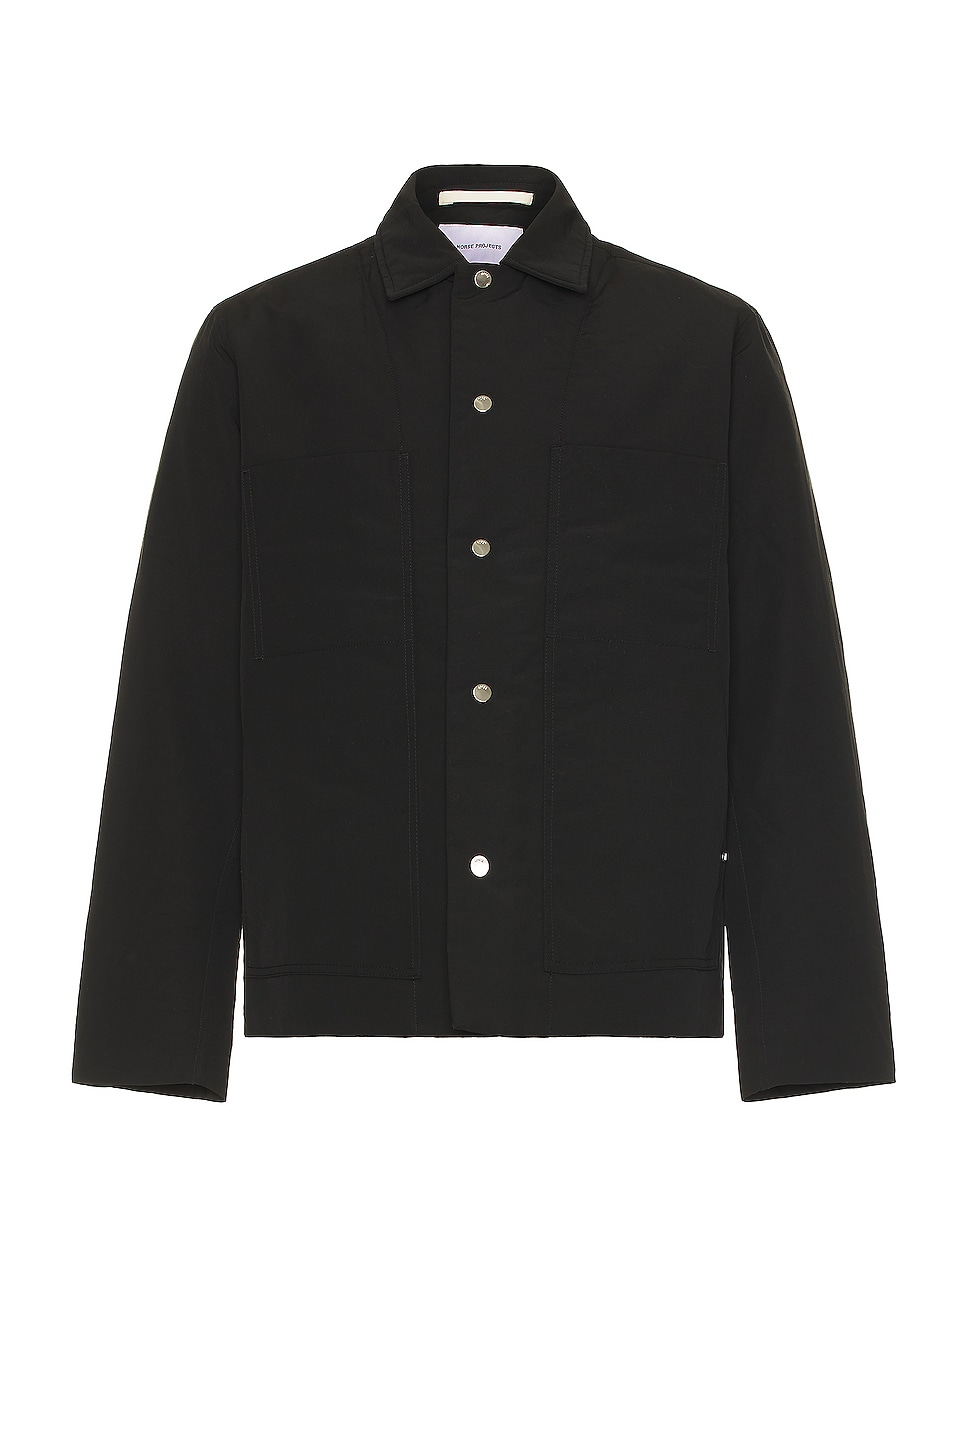 Image 1 of Norse Projects Pelle Waxed Nylon Insulated Jacket in Black